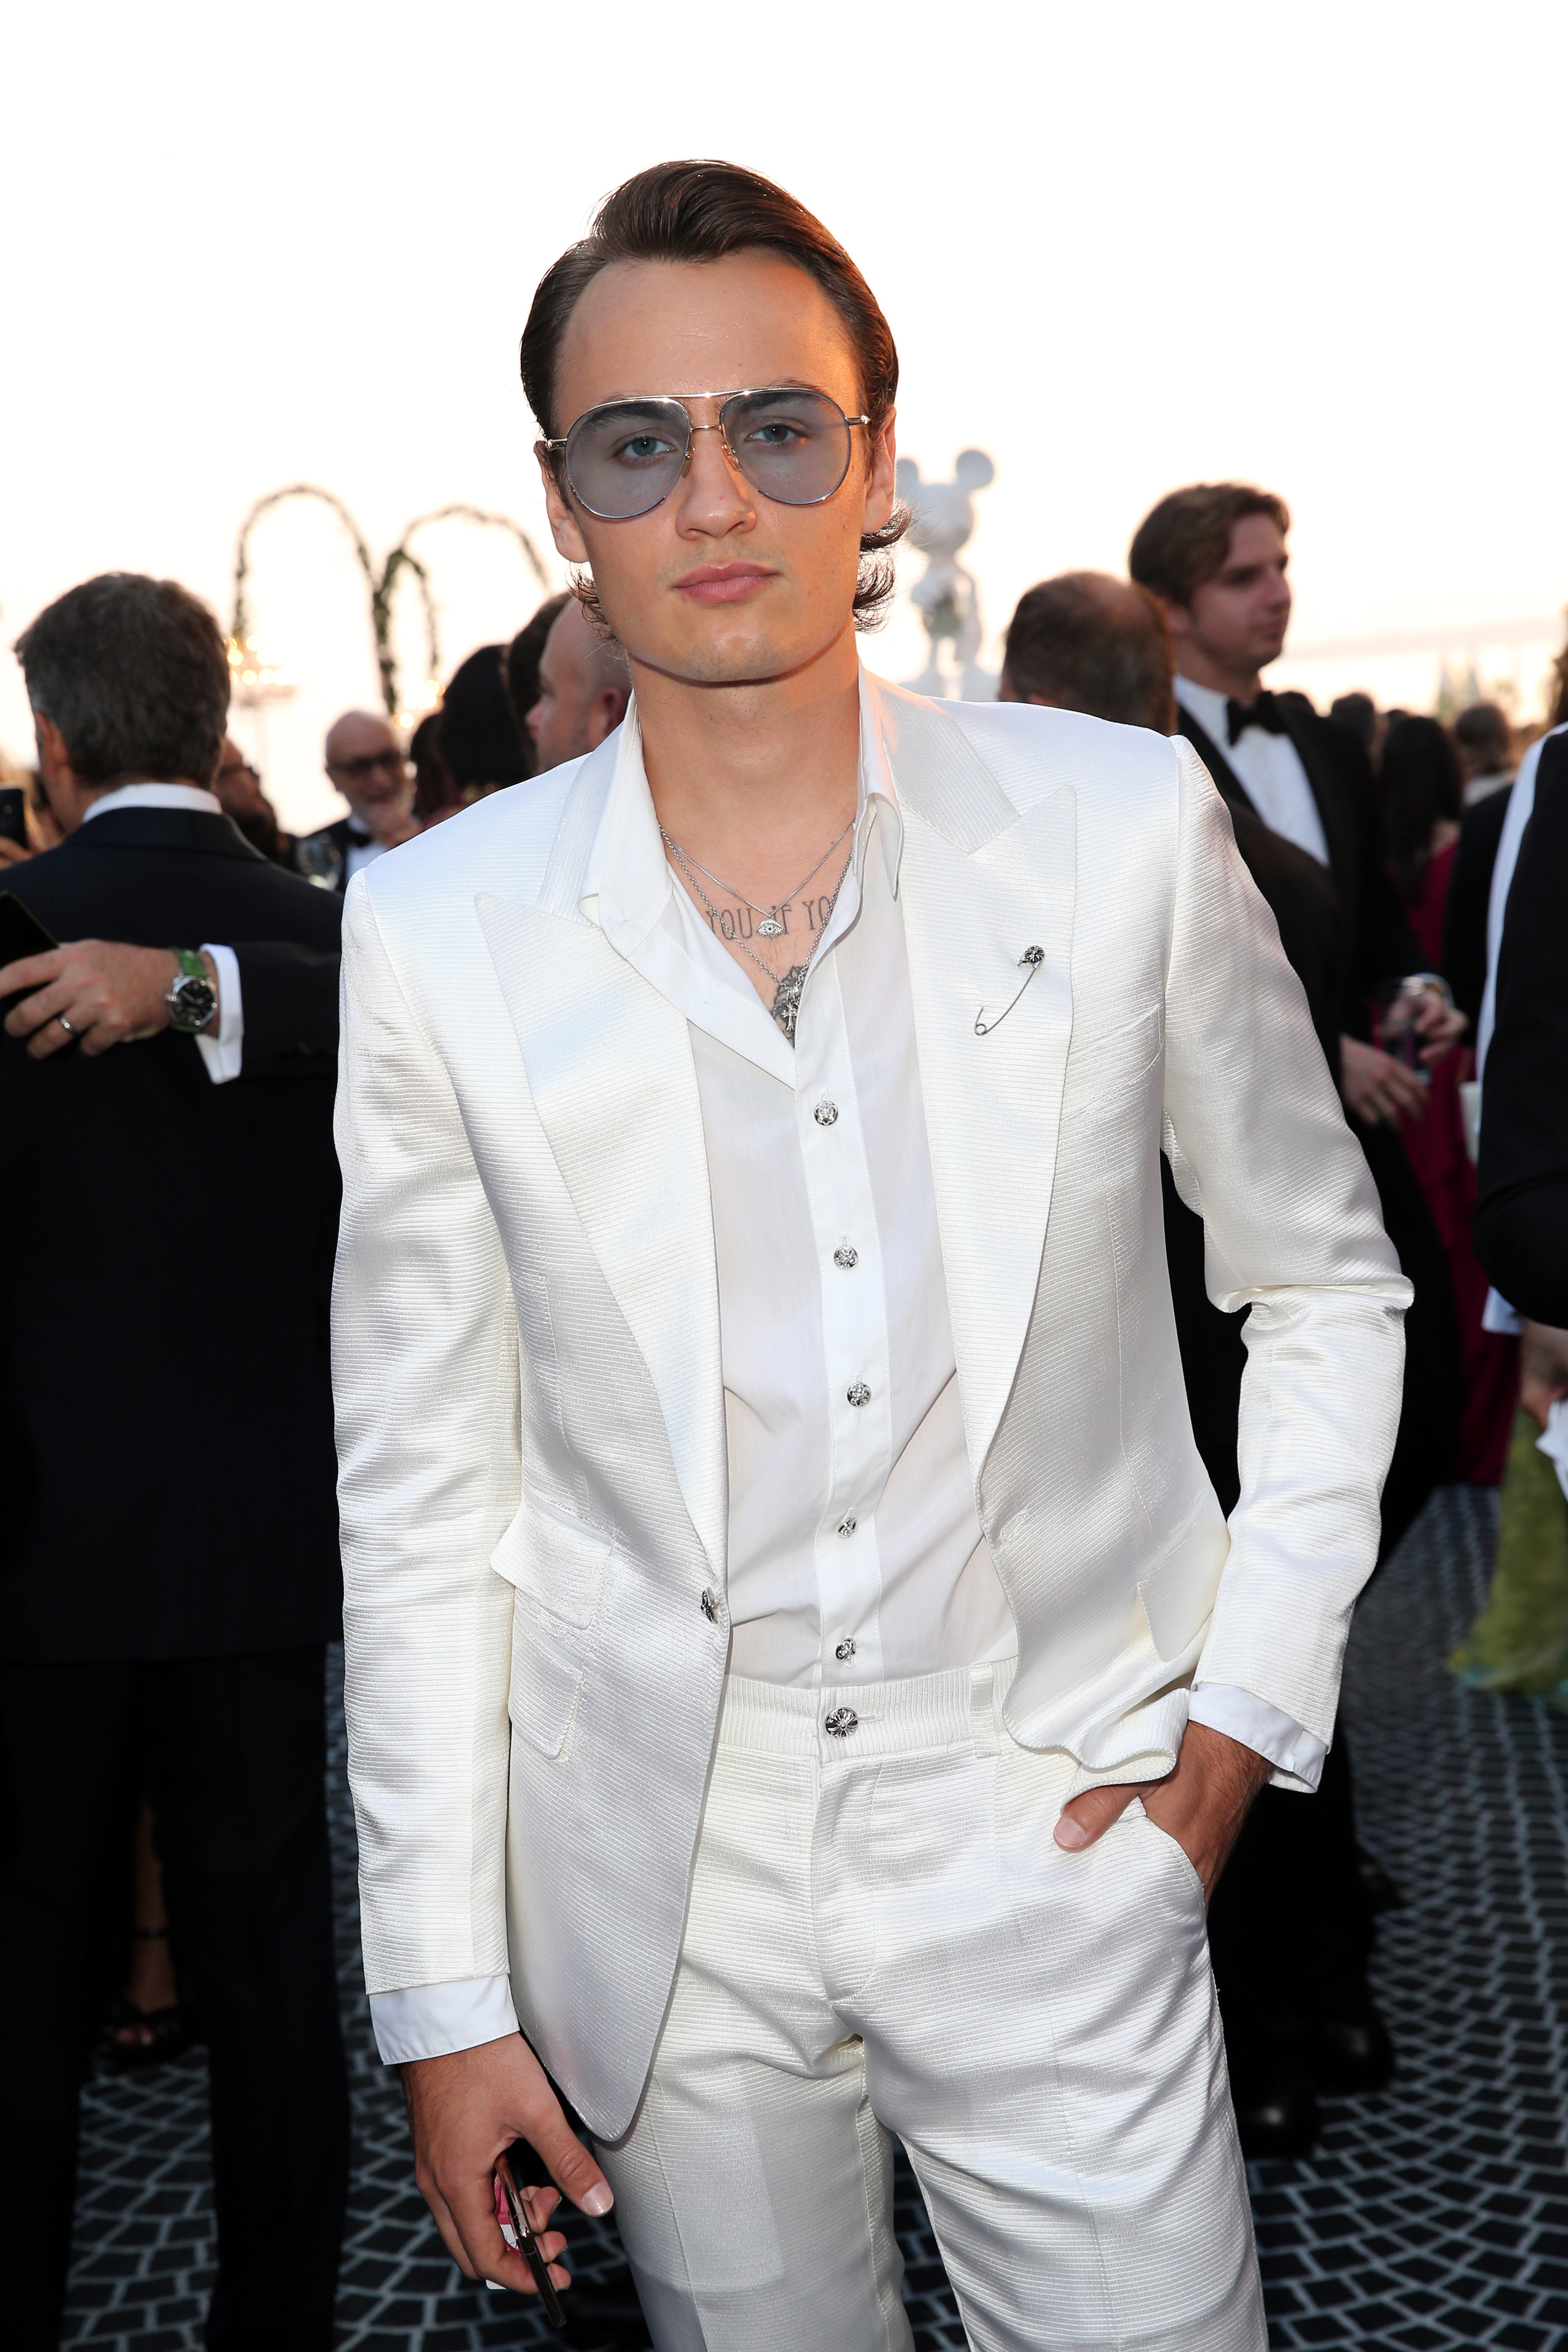 Brandon Lee during the amfAR Cannes Gala 2019 at Hotel du Cap-Eden-Roc in Cap d'Antibes, France on May 23, 2019. | Source: Getty Images